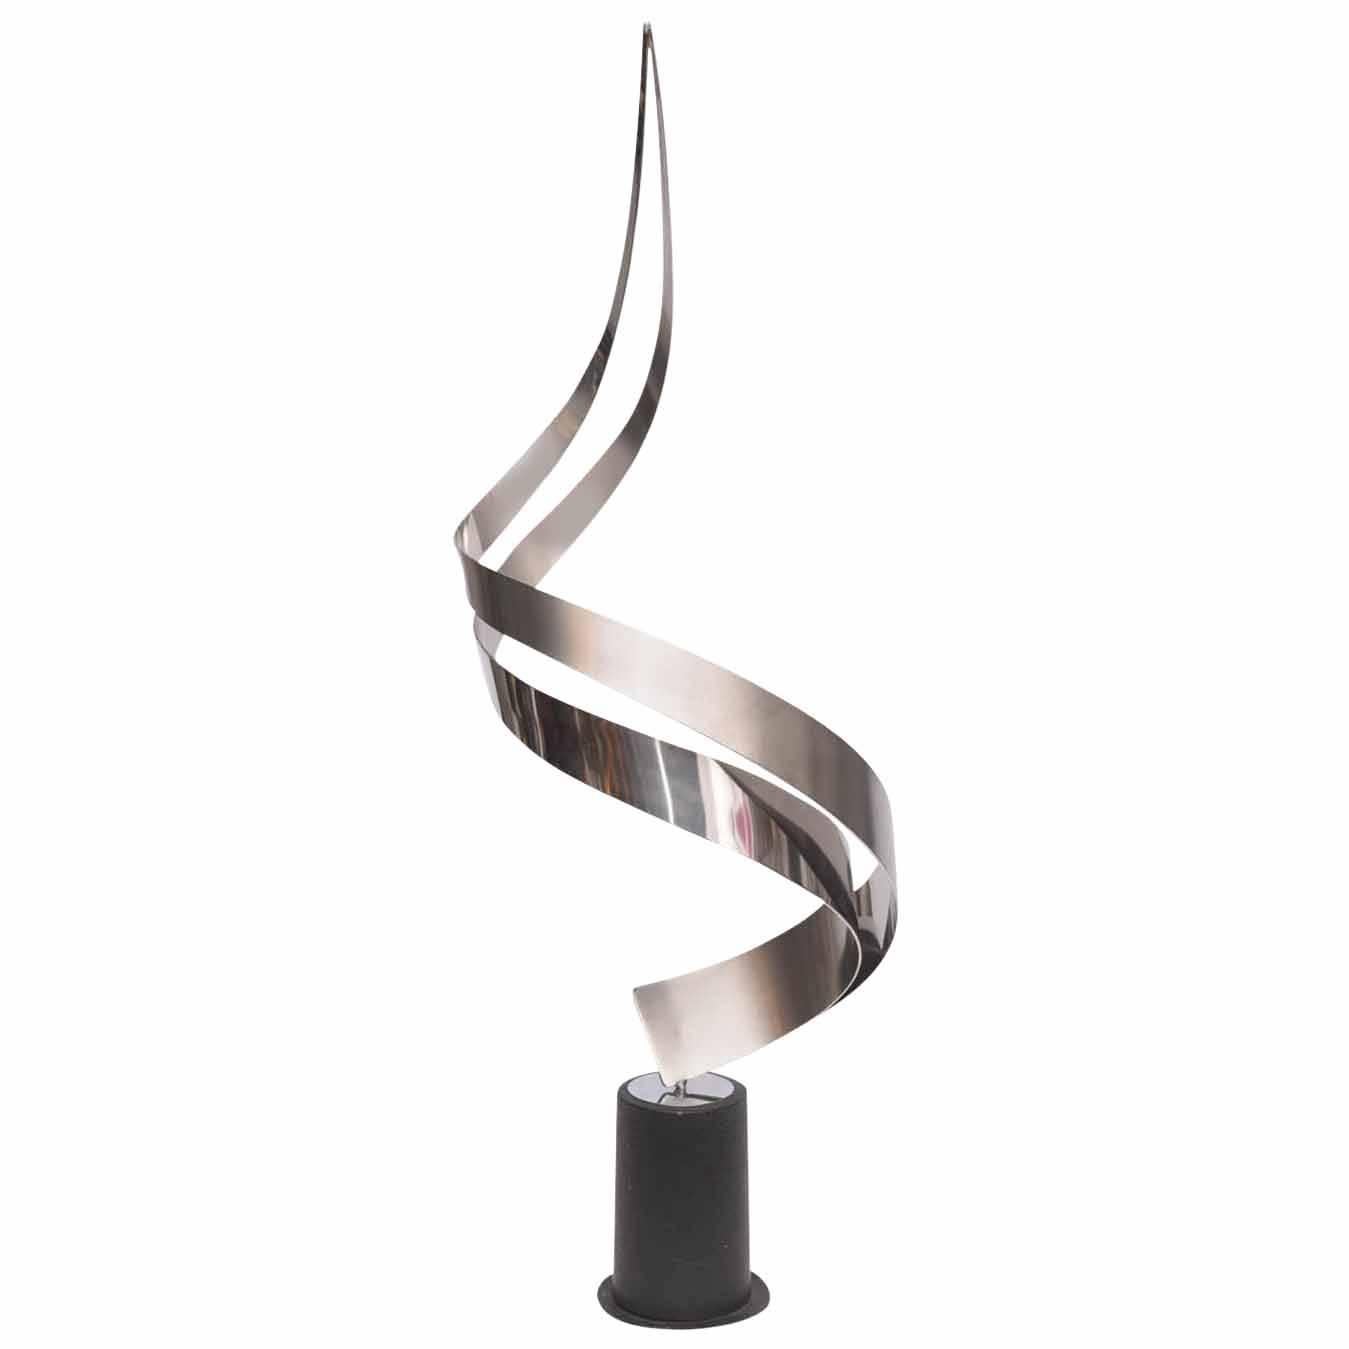 Curtis Jere Swivel Swirl Sculpture in Chrome, 1970s, USA For Sale